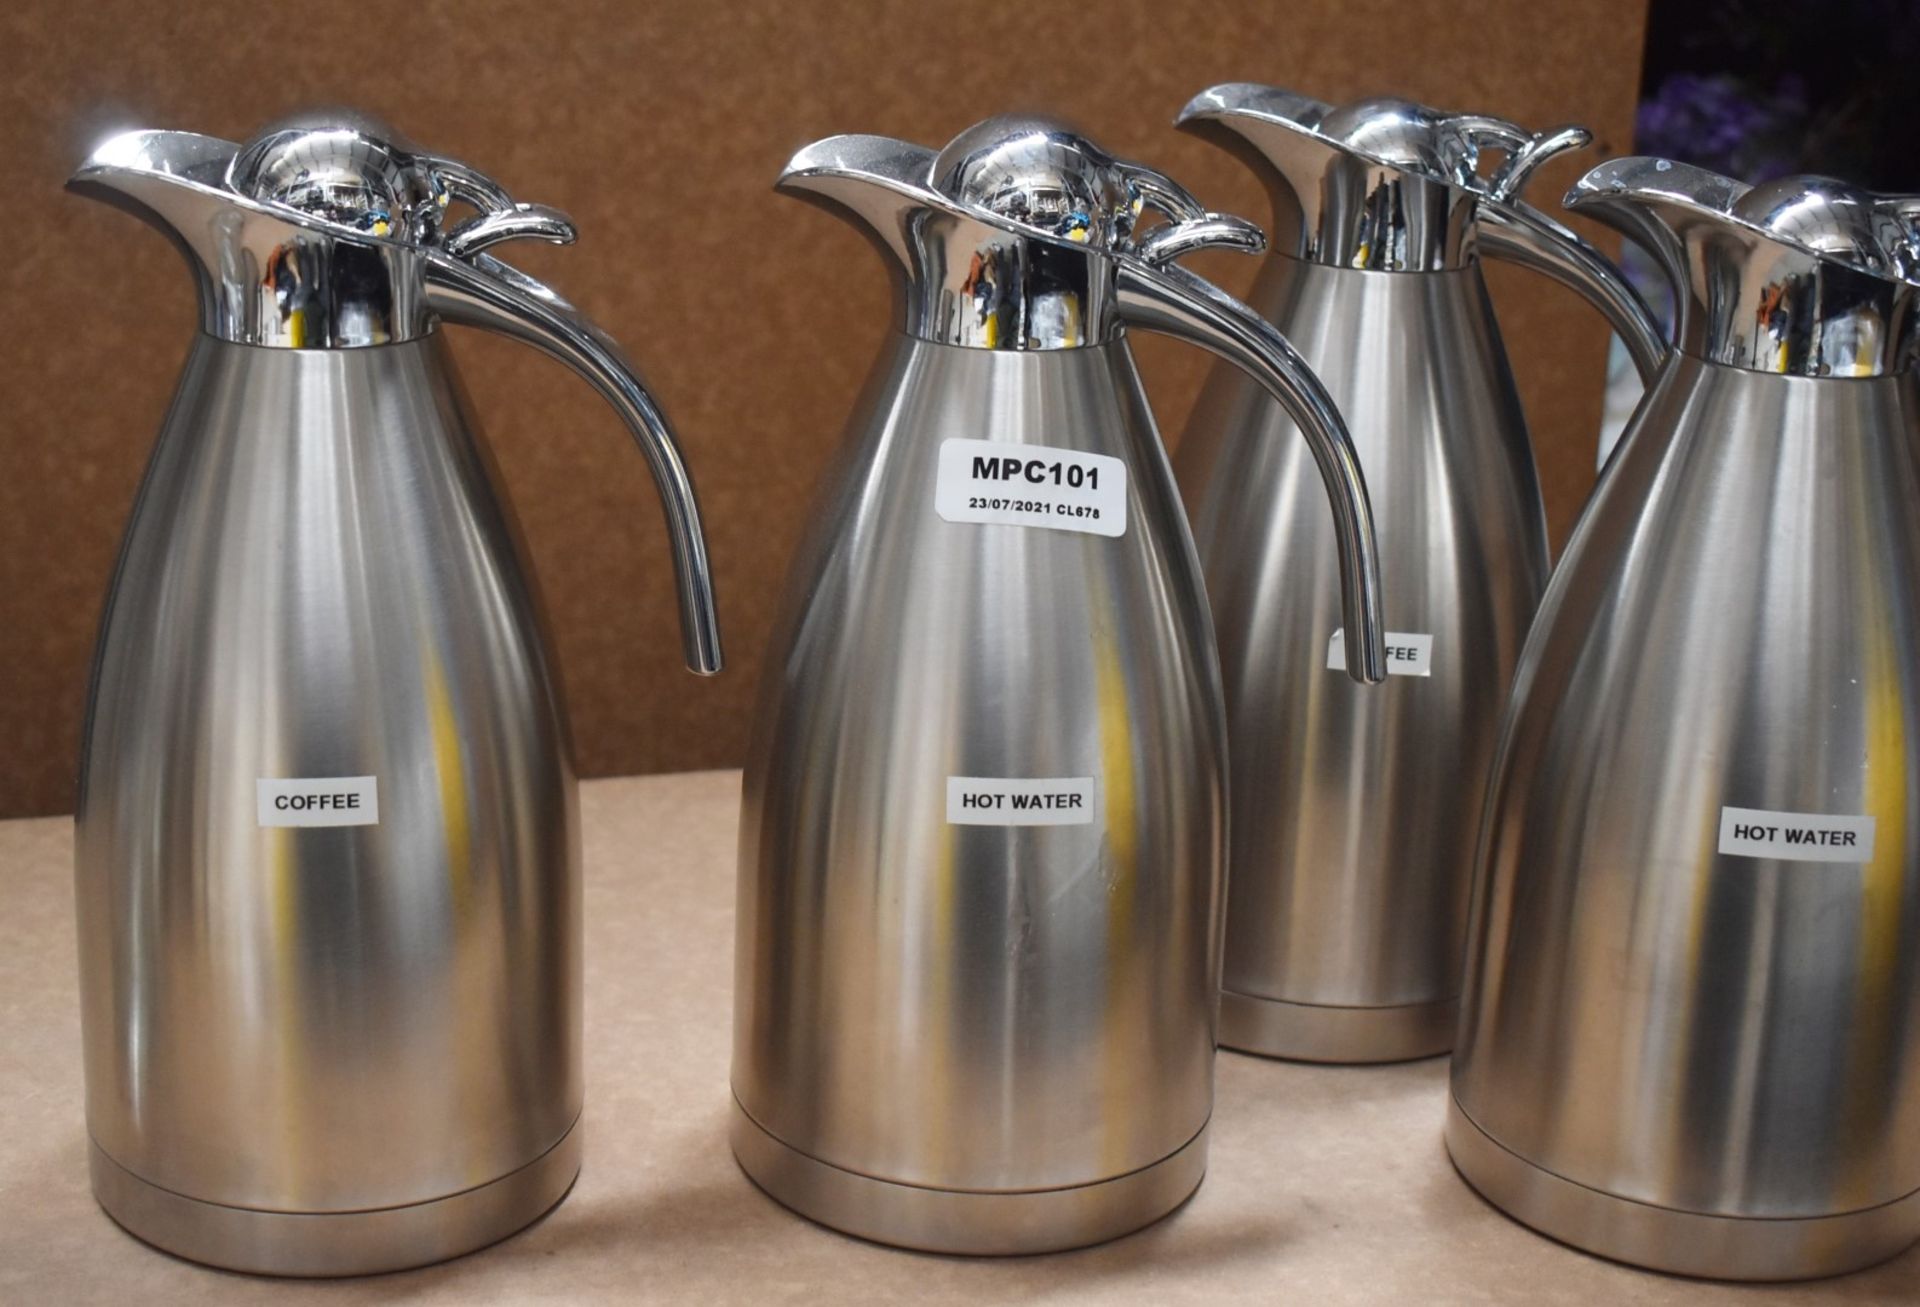 4 x Stainless Steel Boiling Water / Coffee Jug Dispensers - Ref: MPC101 P1 - CL678 - Location: - Image 2 of 4